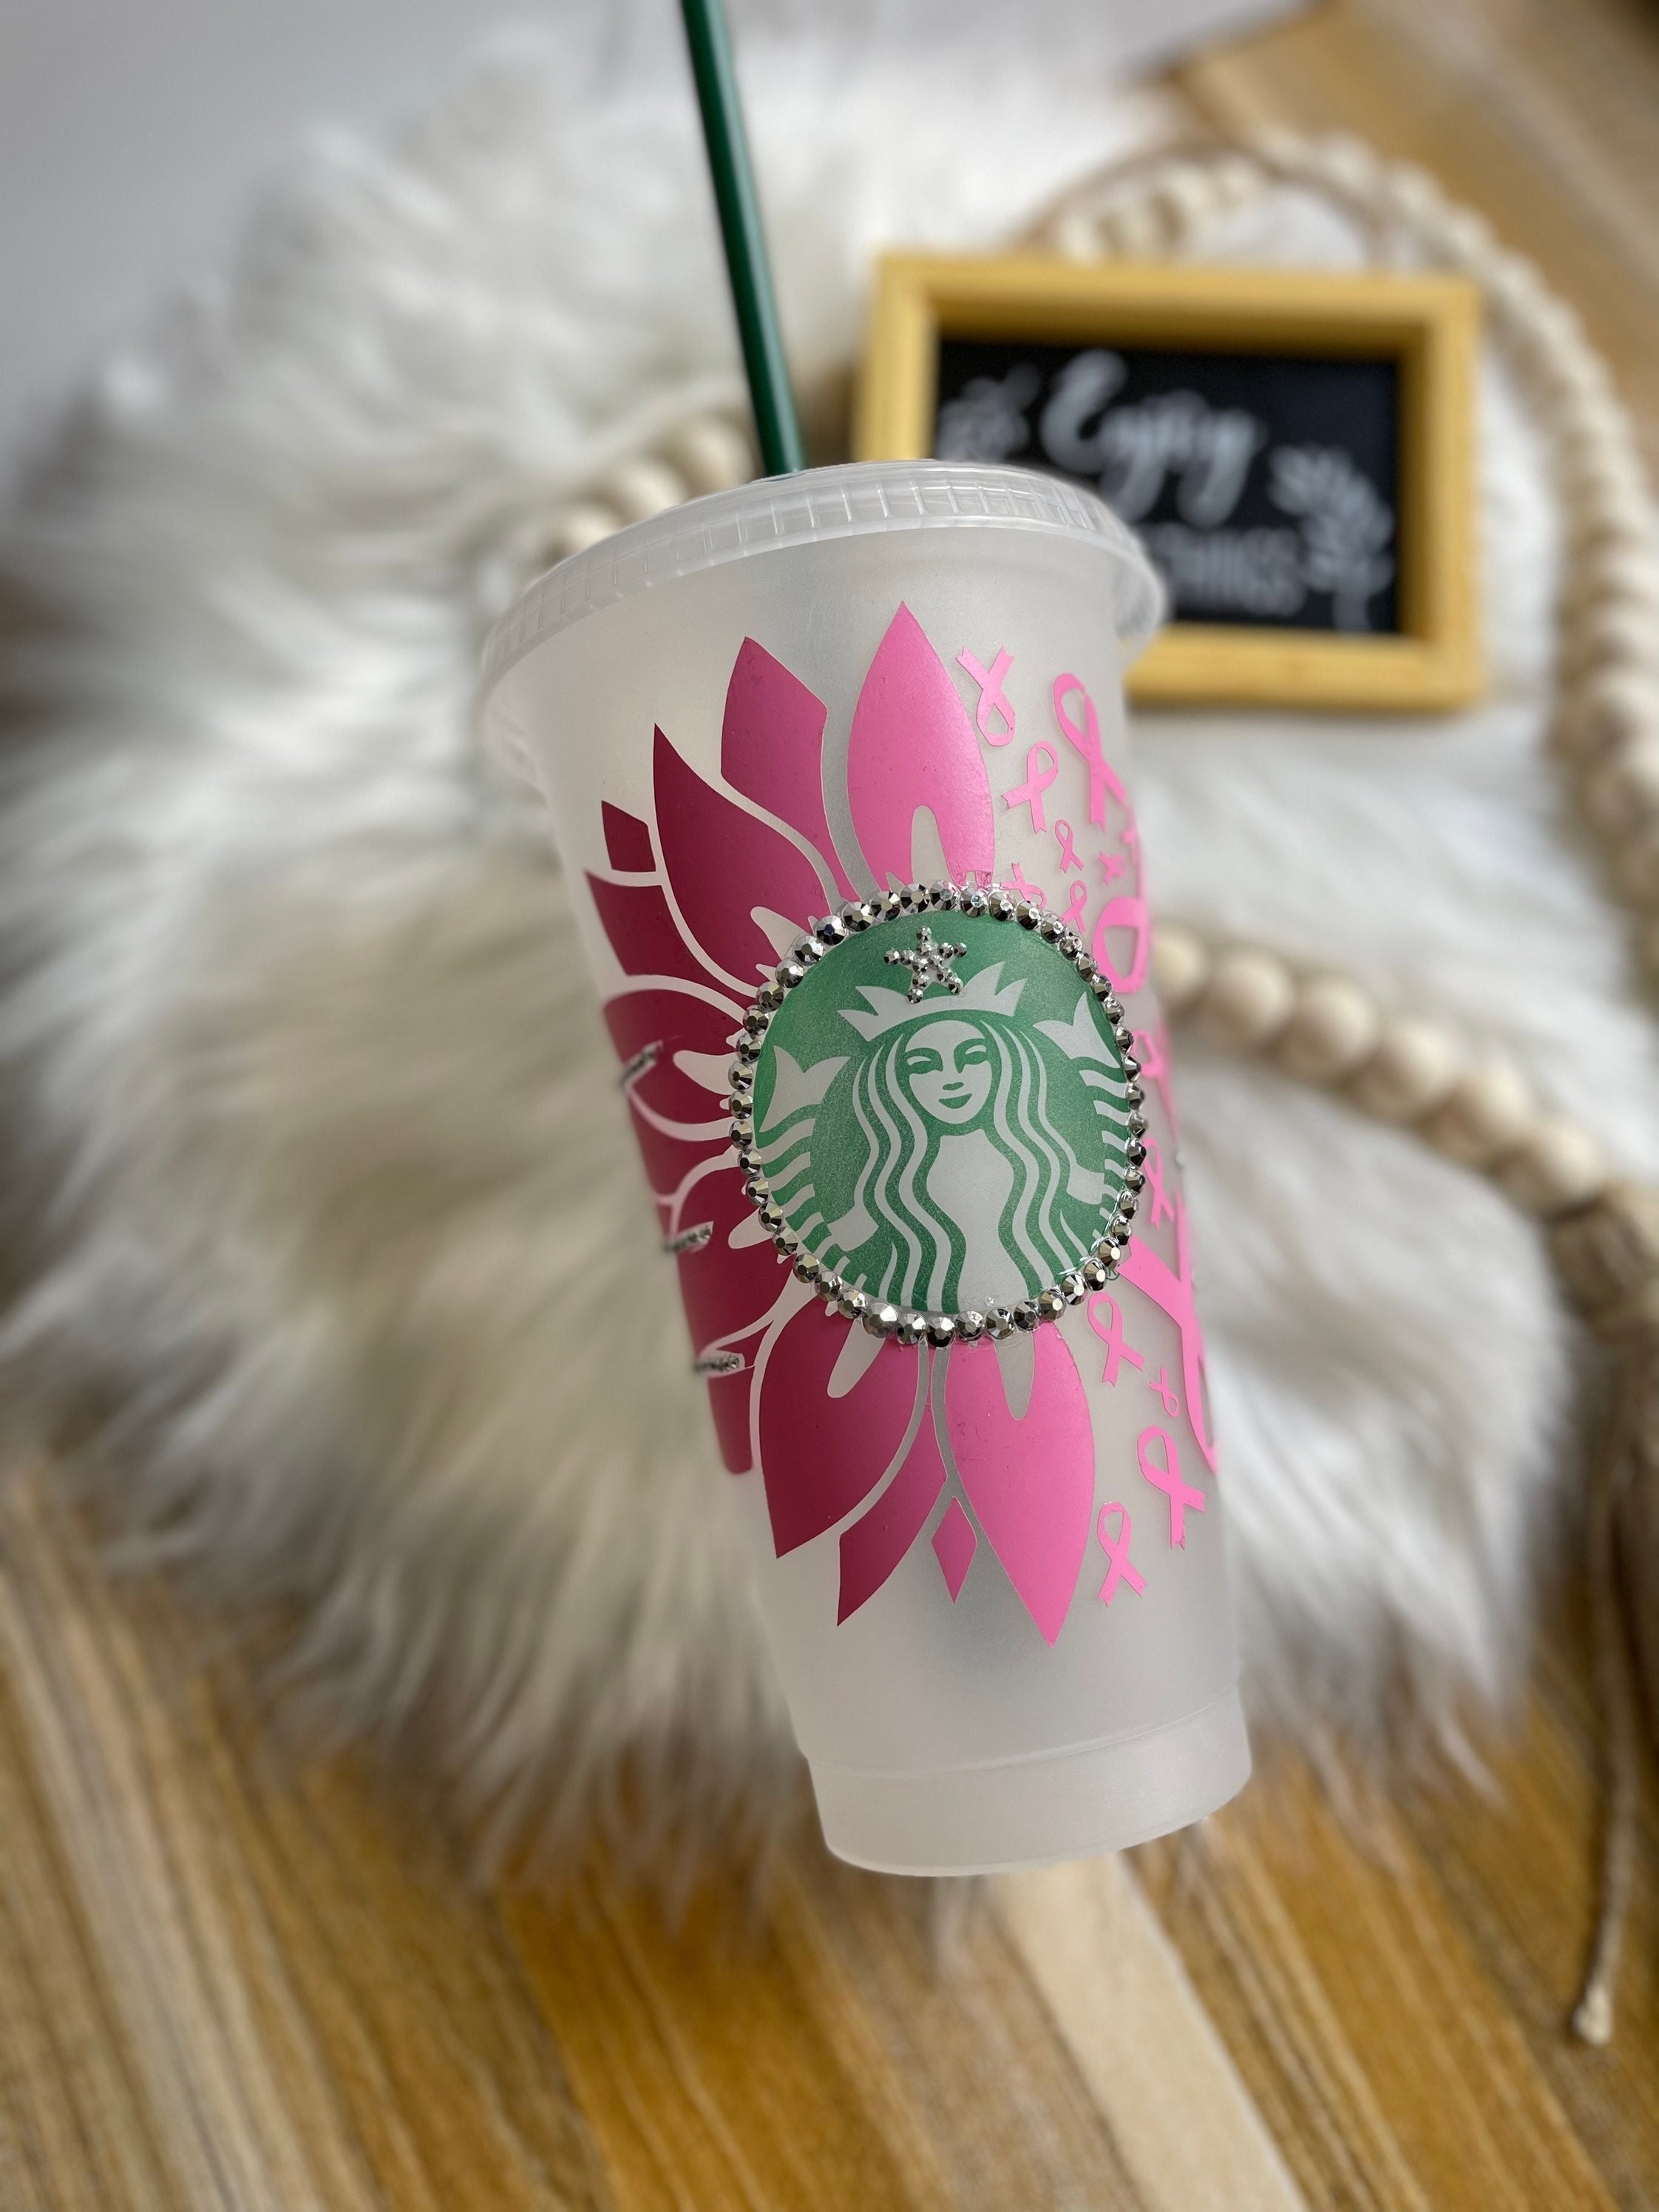 Starbucks Released A Purple Rhinestone Cold Cup And You Won't Believe The  Price